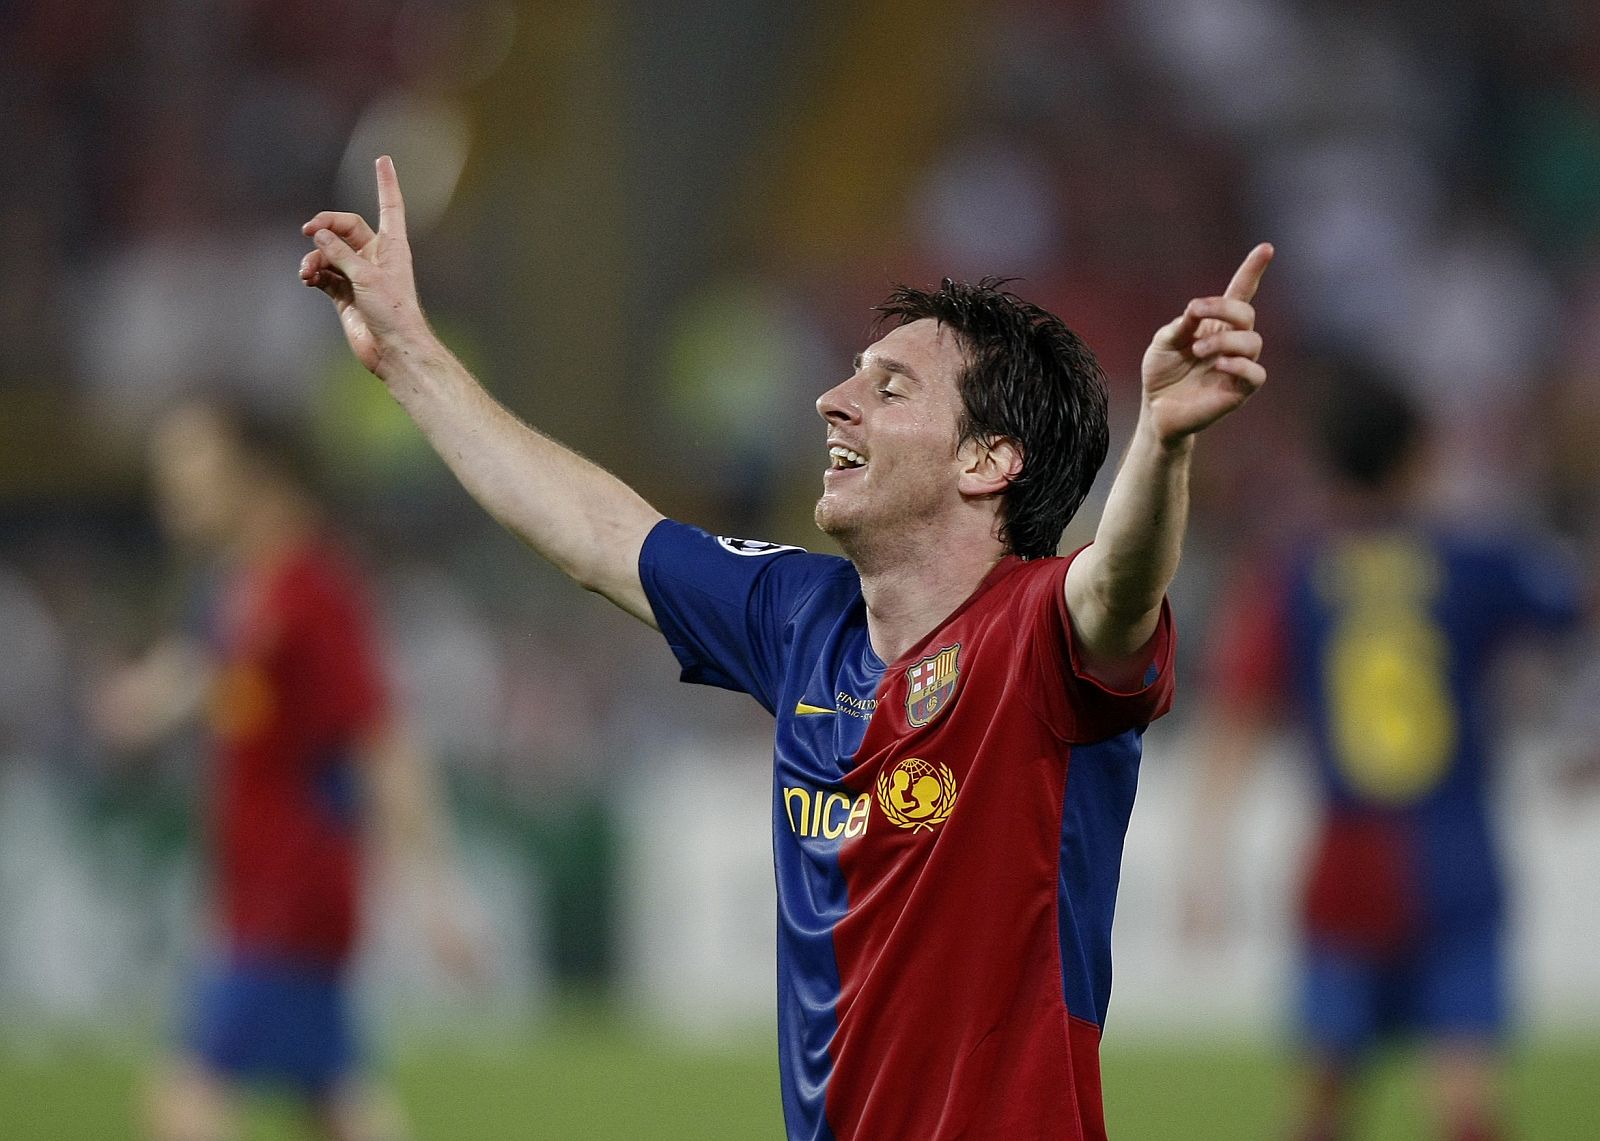 Barcelona's Messi celebrates goal during Champions League final against Manchester United in Rome